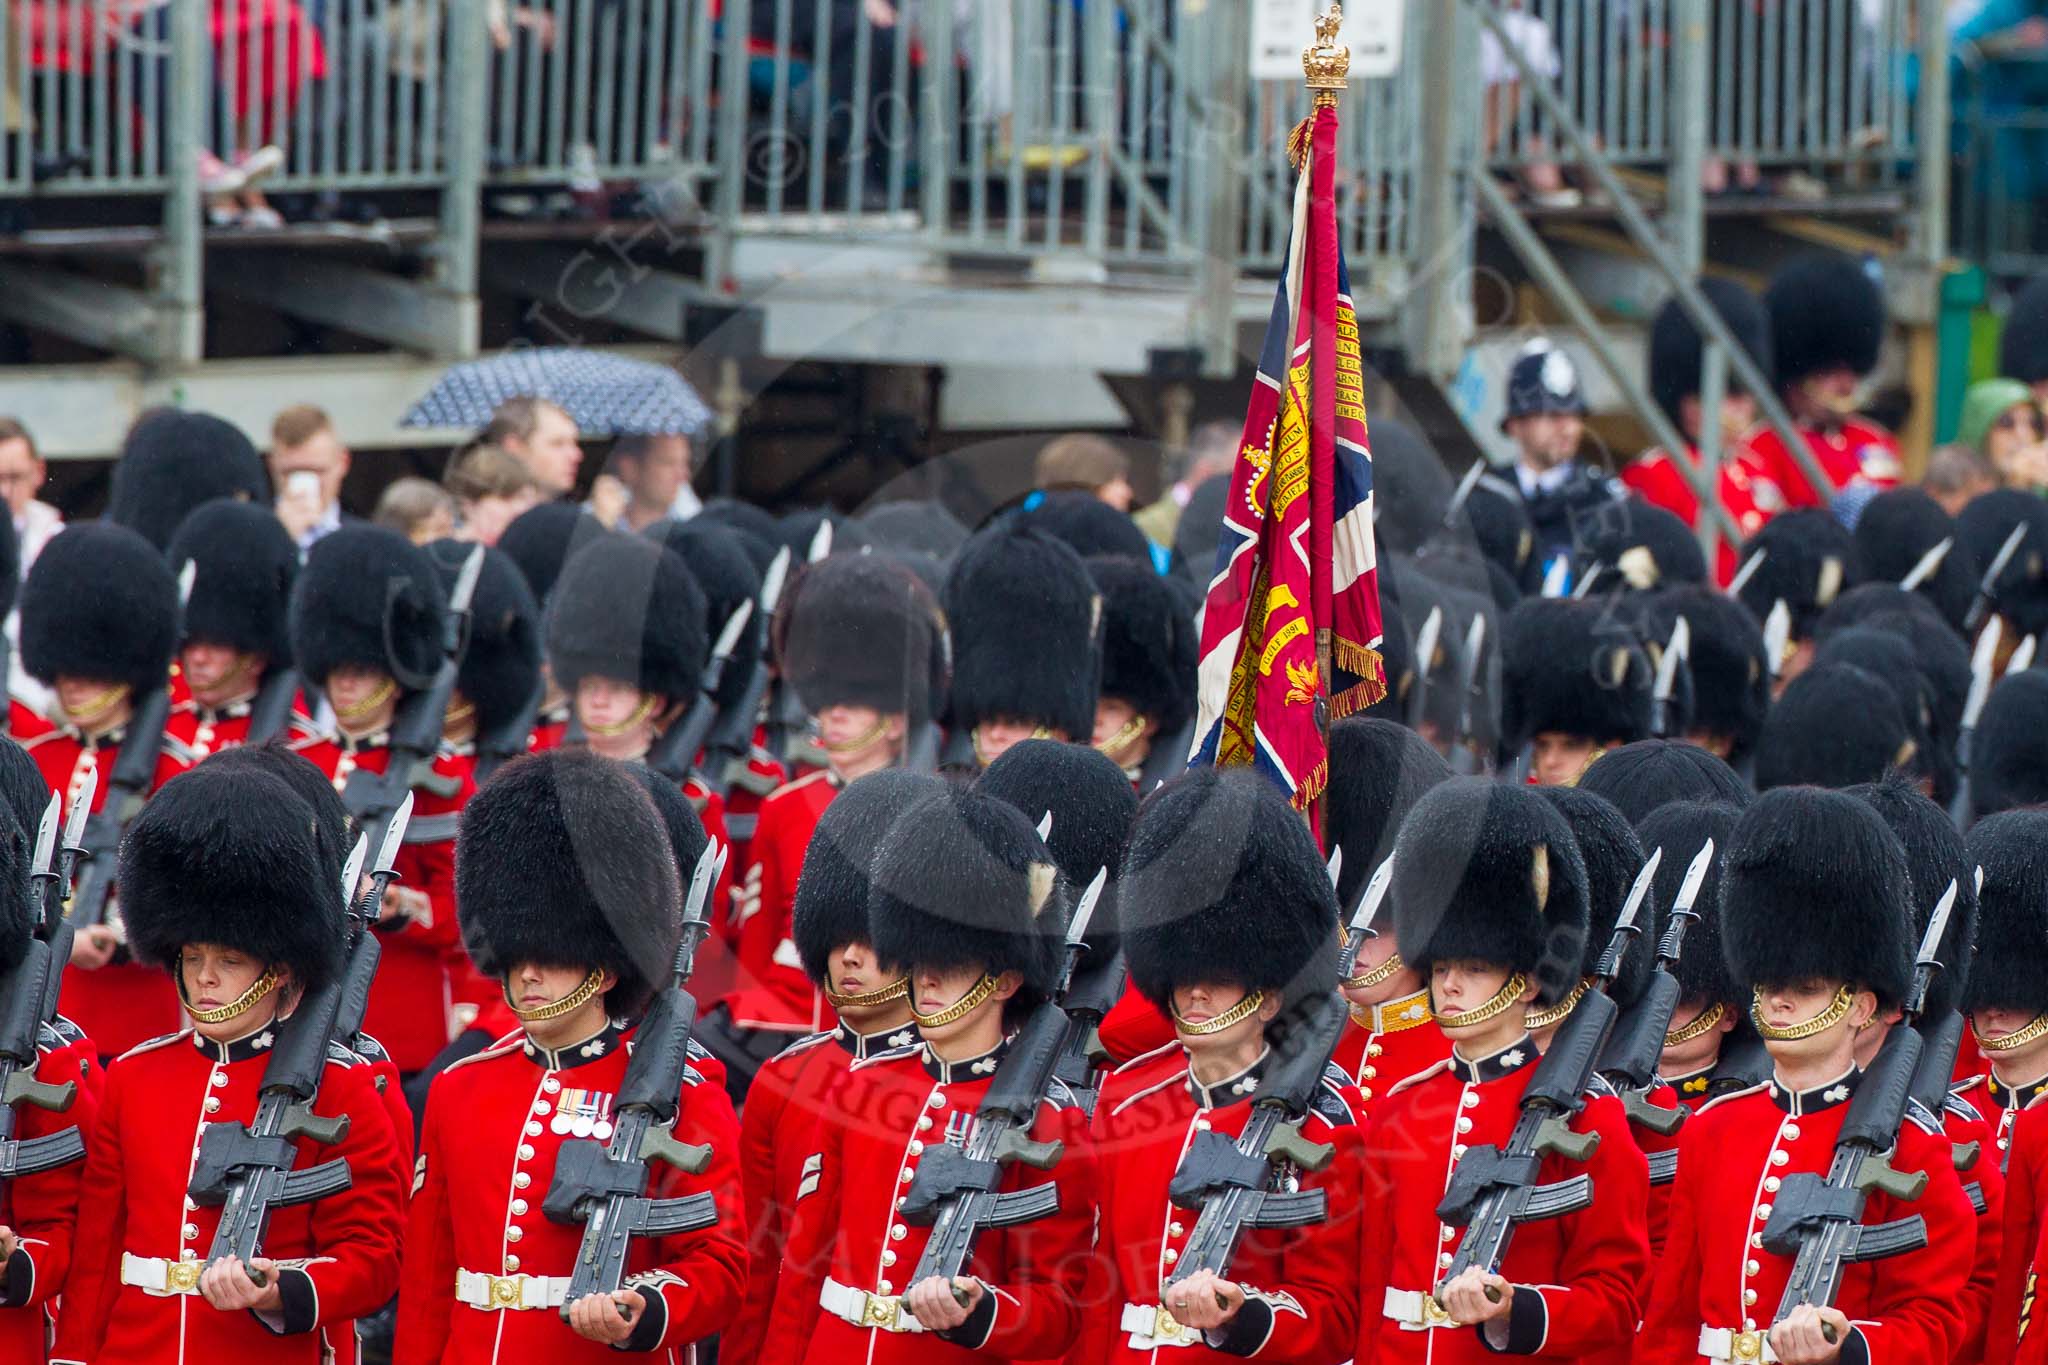 The Colonel's Review 2014.
Horse Guards Parade, Westminster,
London,

United Kingdom,
on 07 June 2014 at 11:32, image #473